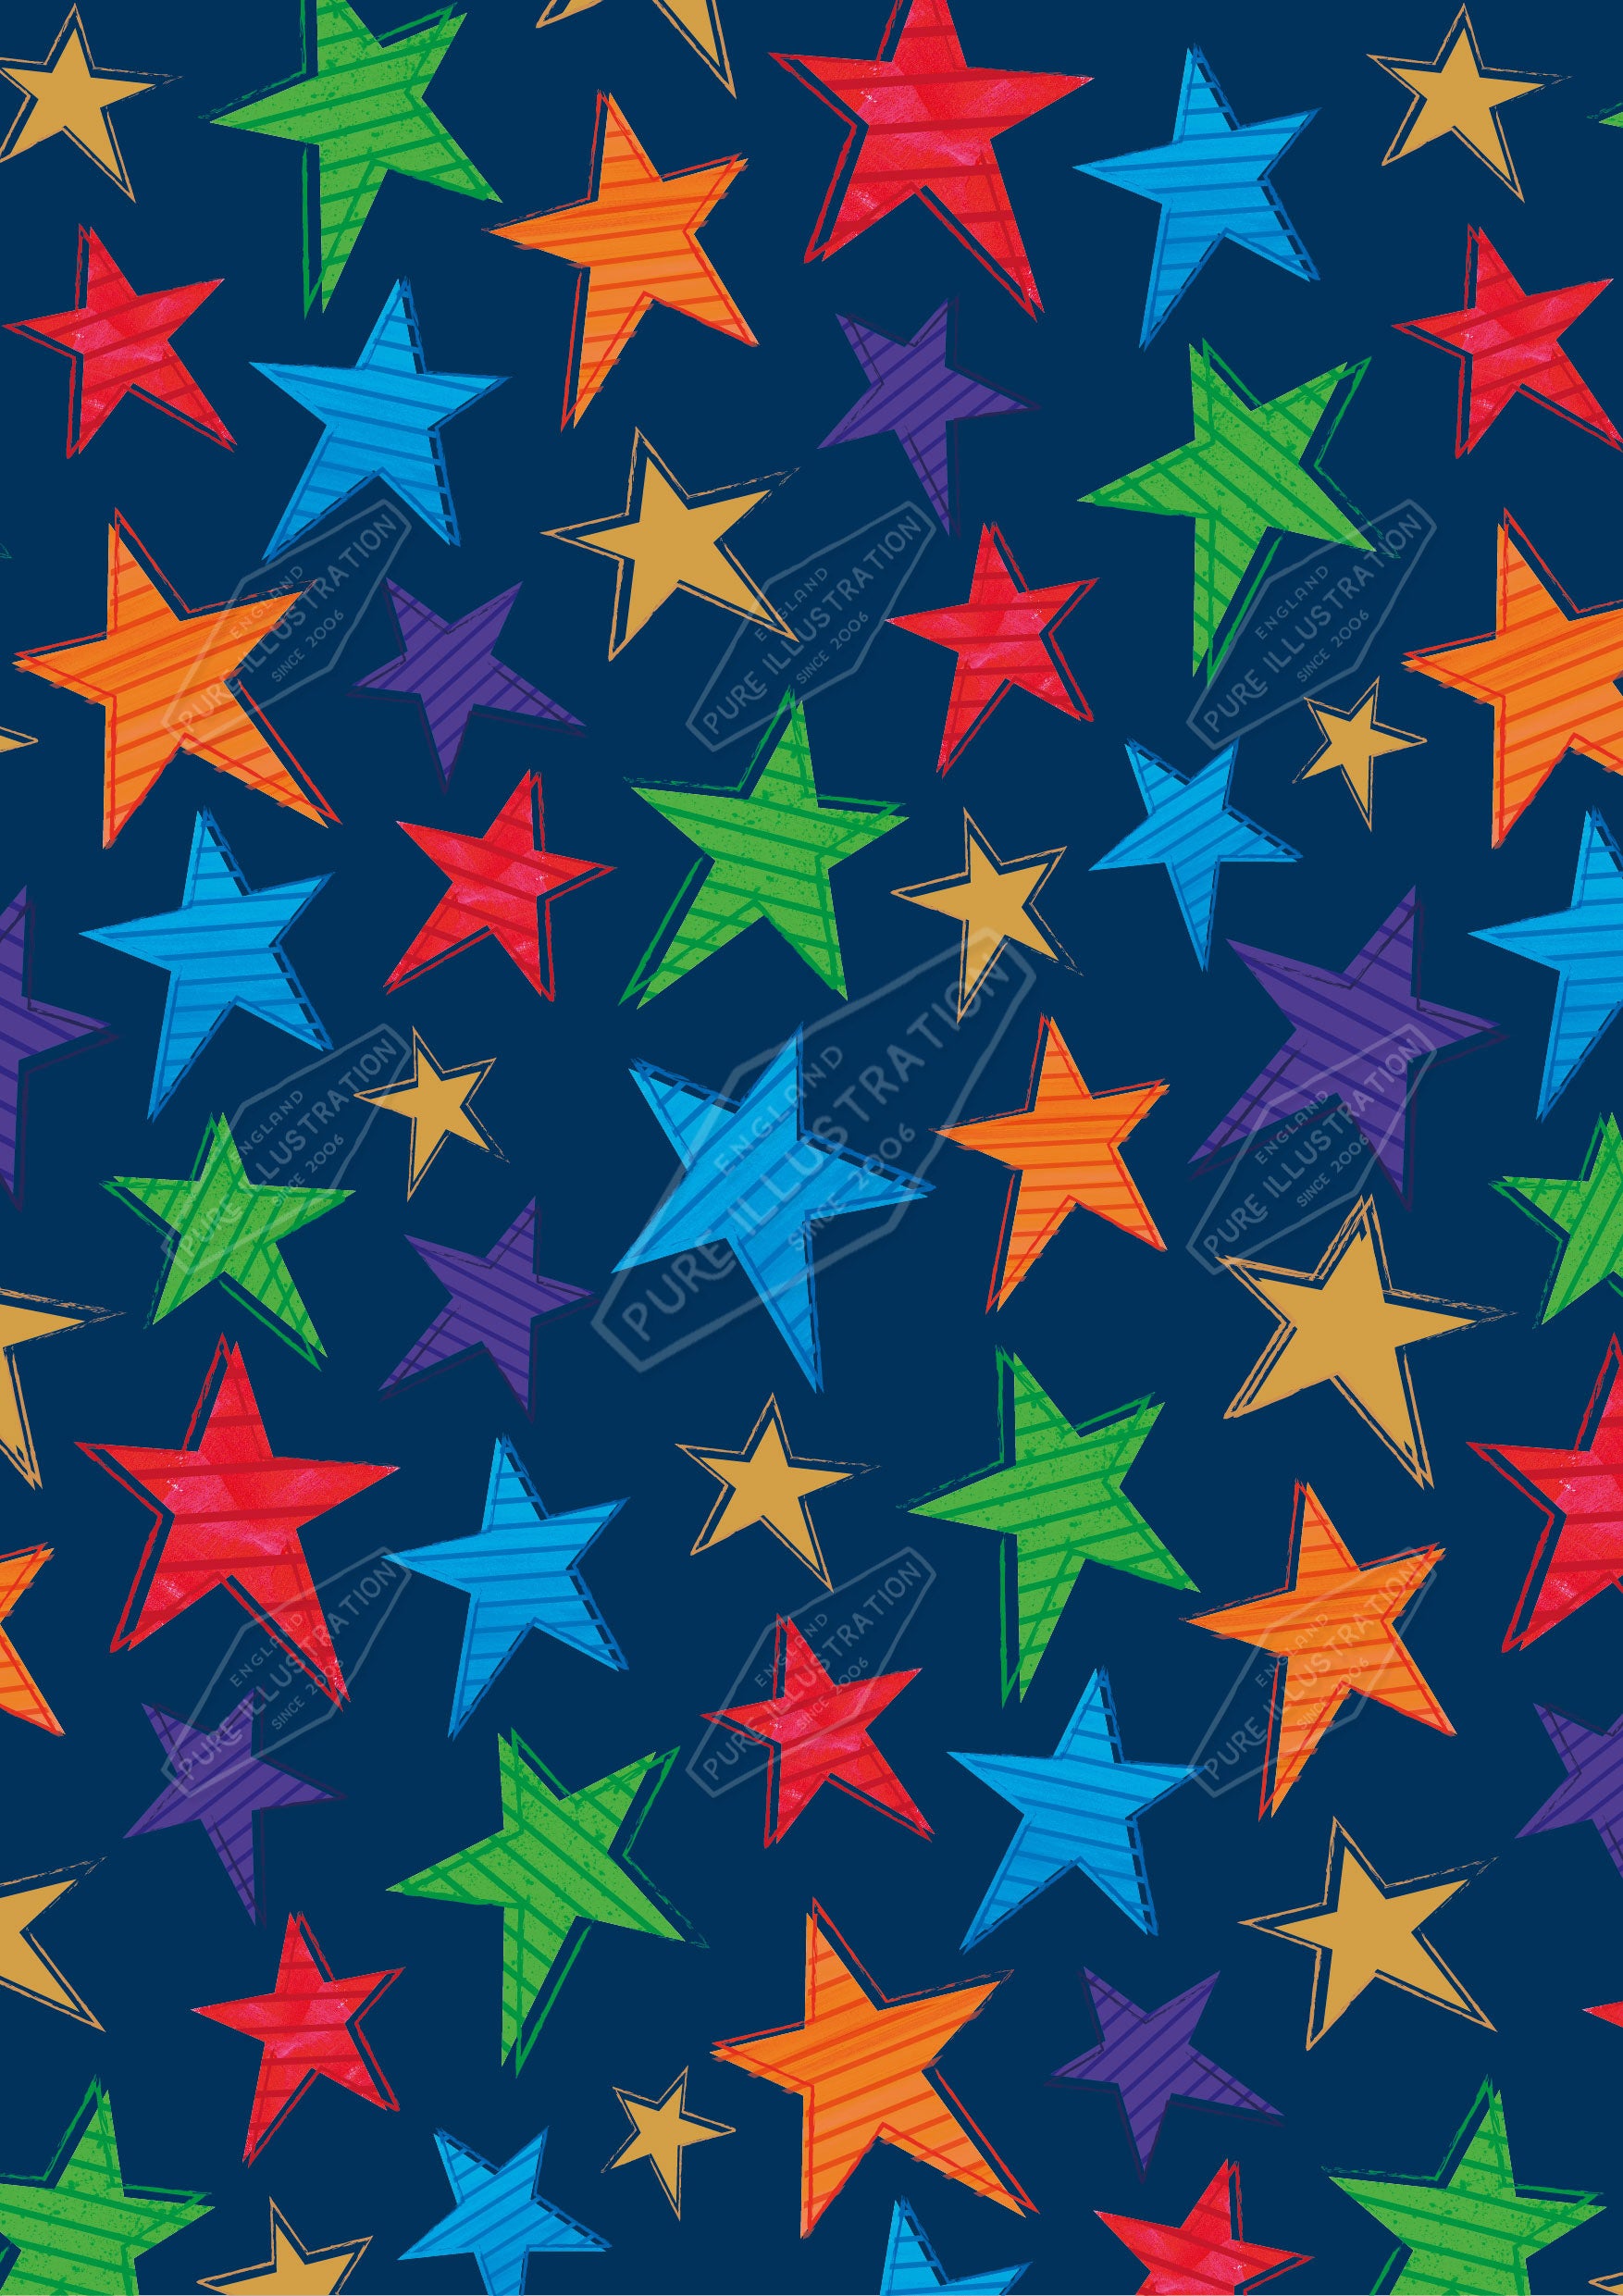 00035836SPI- Sarah Pitt is represented by Pure Art Licensing Agency - Everyday Pattern Design